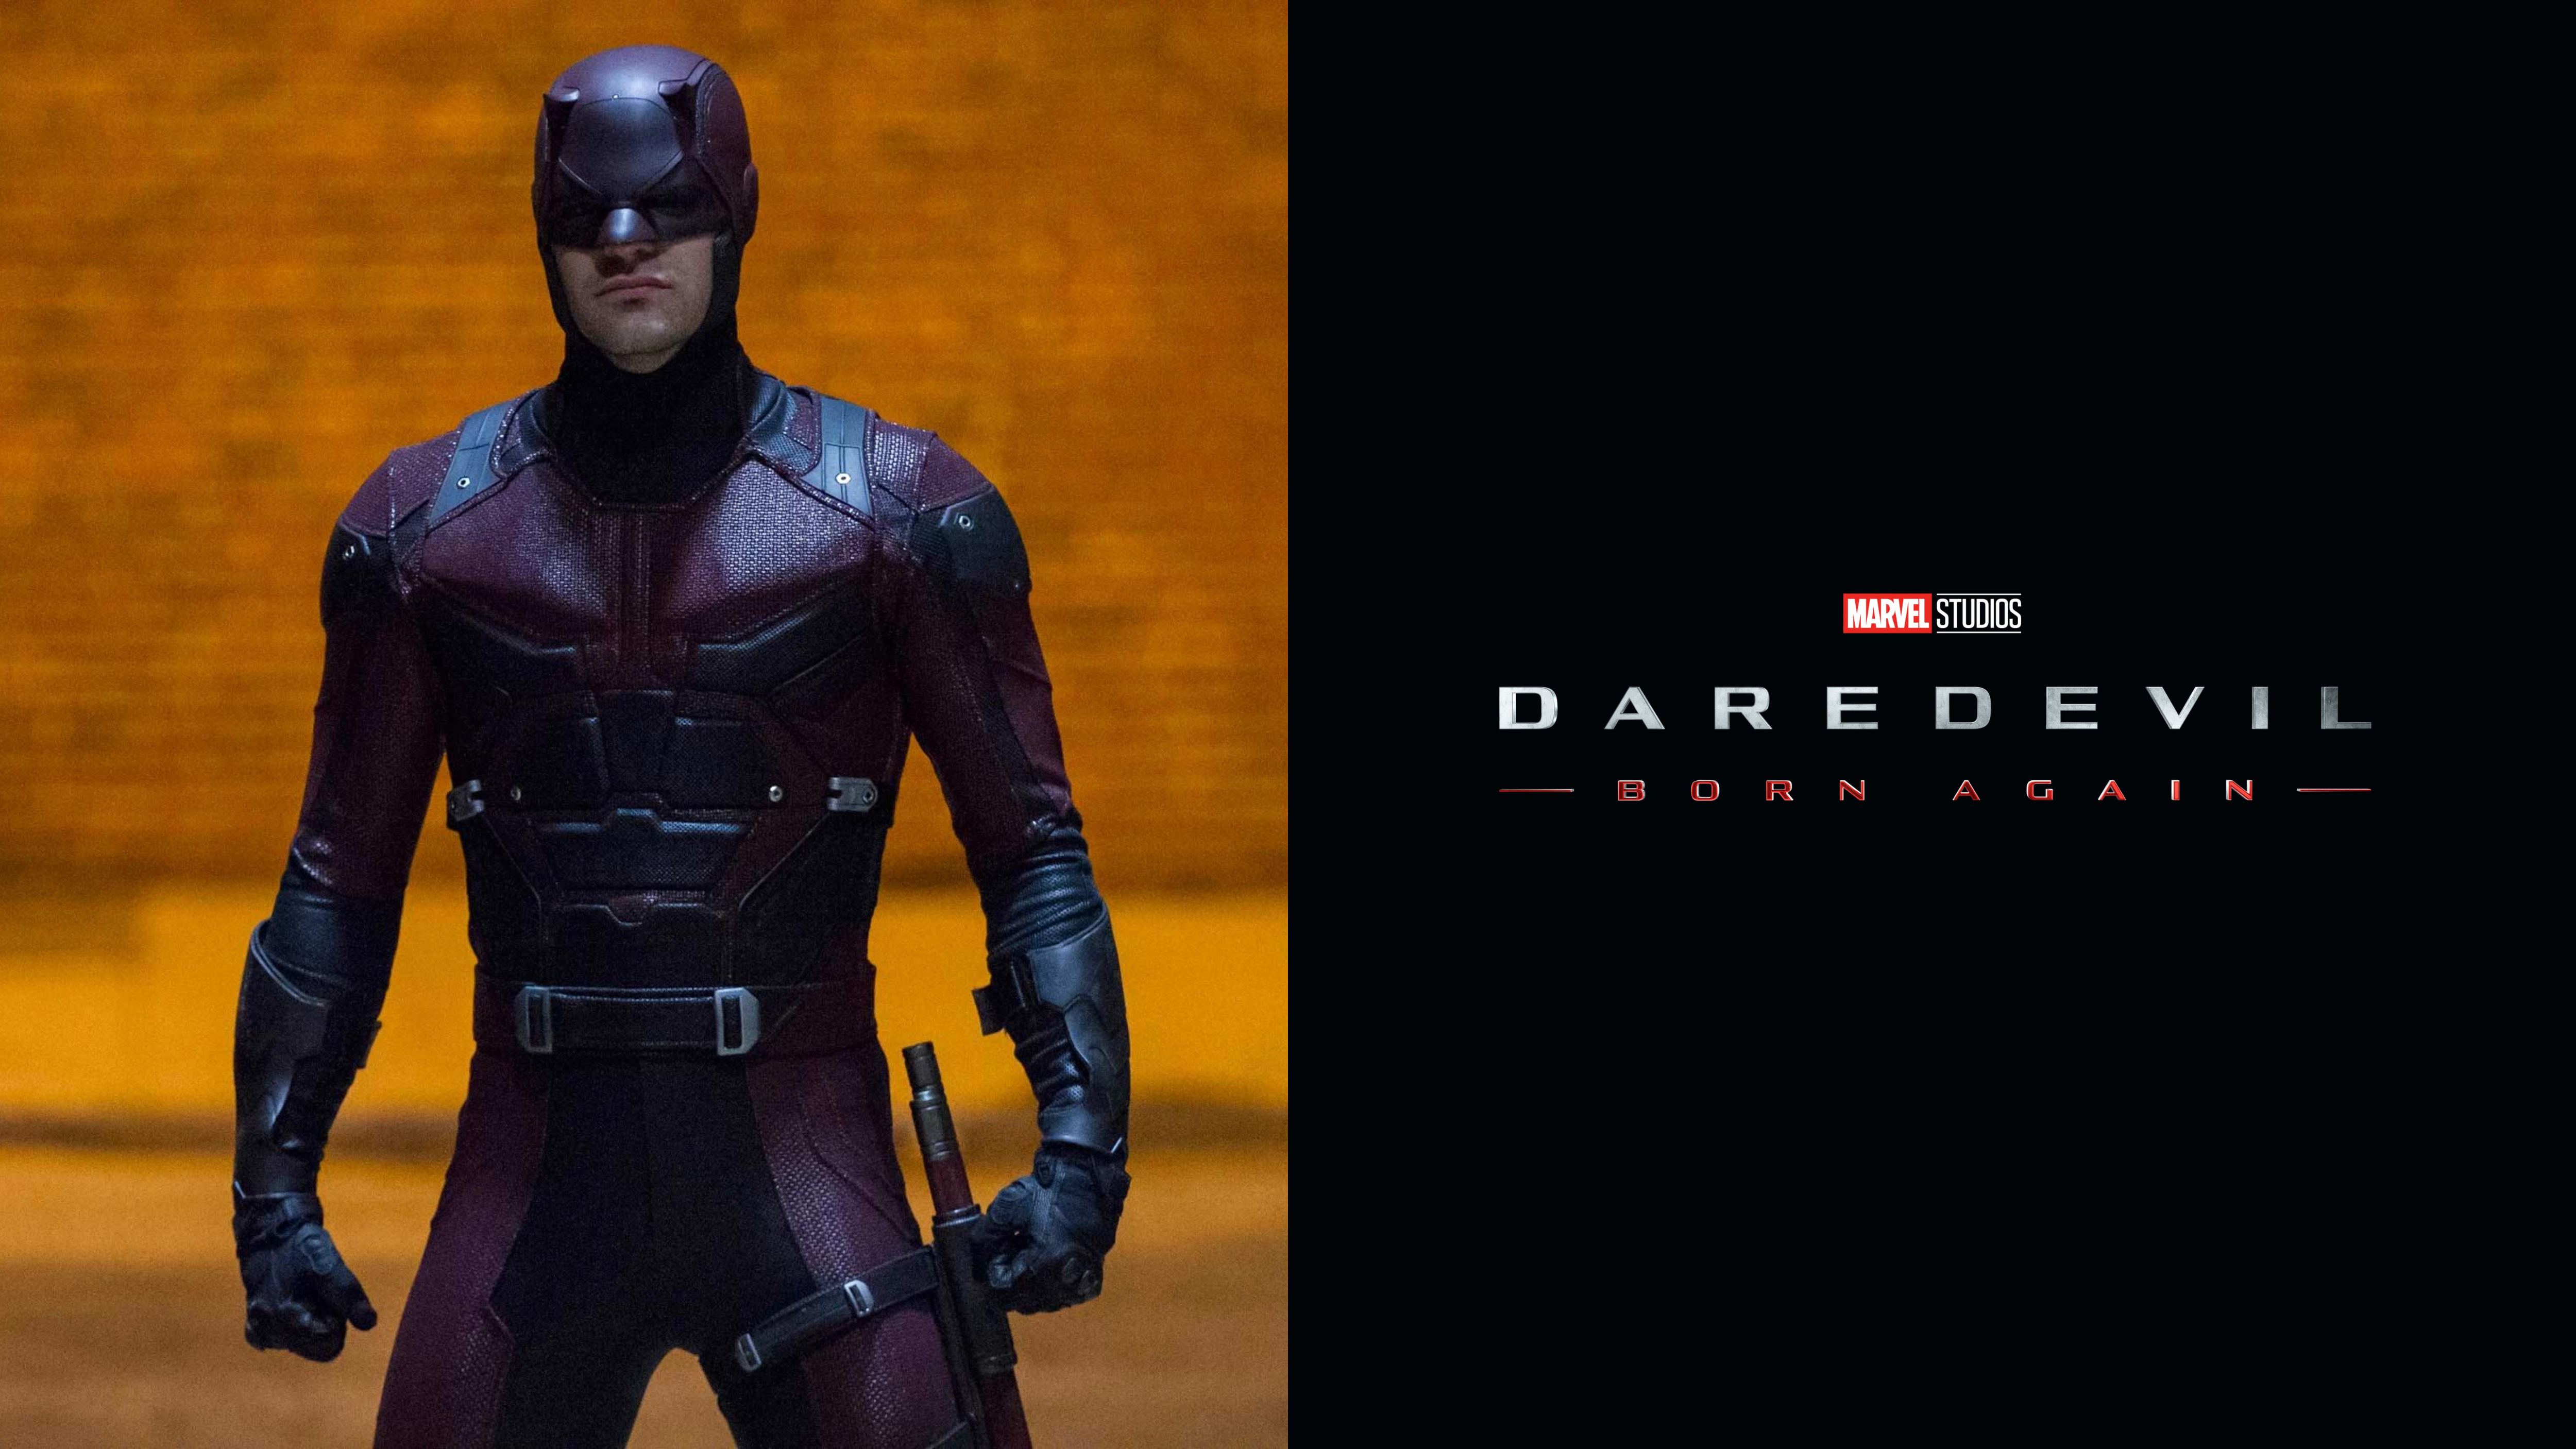 Image of Daredevil and the Daredevil: Born Again Logo, amidst the reveal of Daredevil's New Suit for the MCU Series.